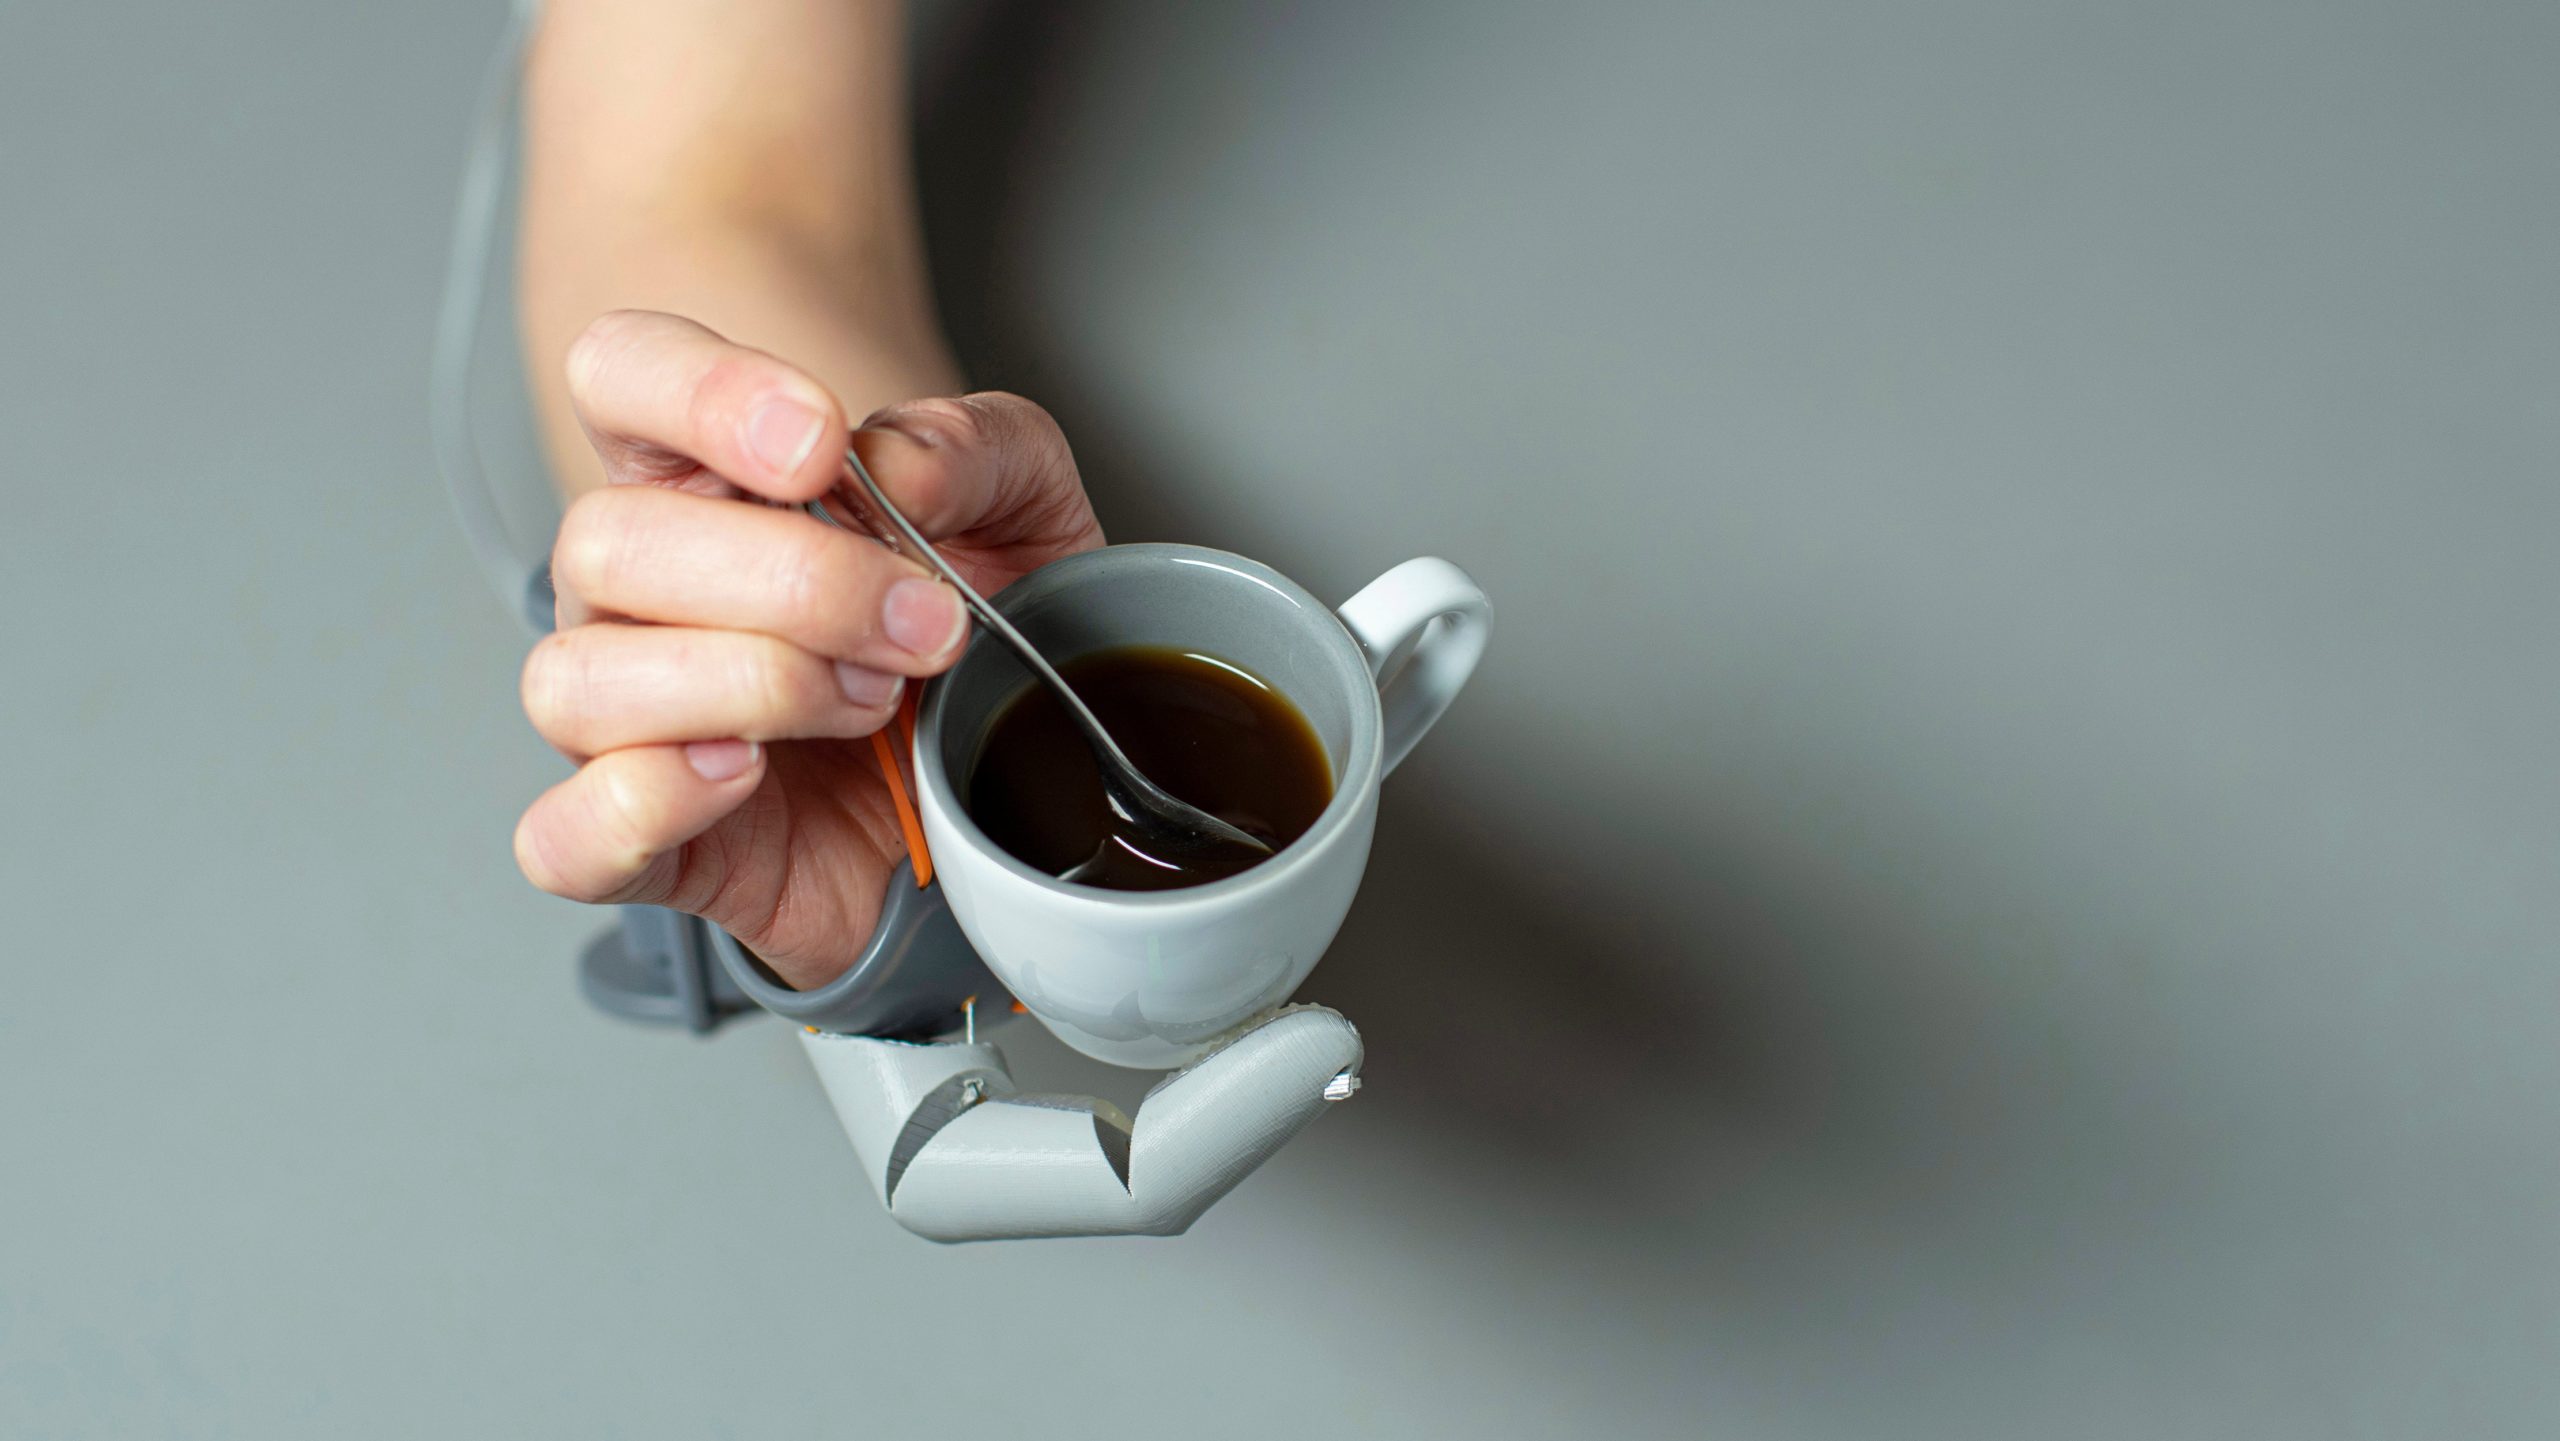 A person supporting a coffee cup with the Third Thumb, while stirring a spoon with their natural fingers. (Image: Dani Clode)